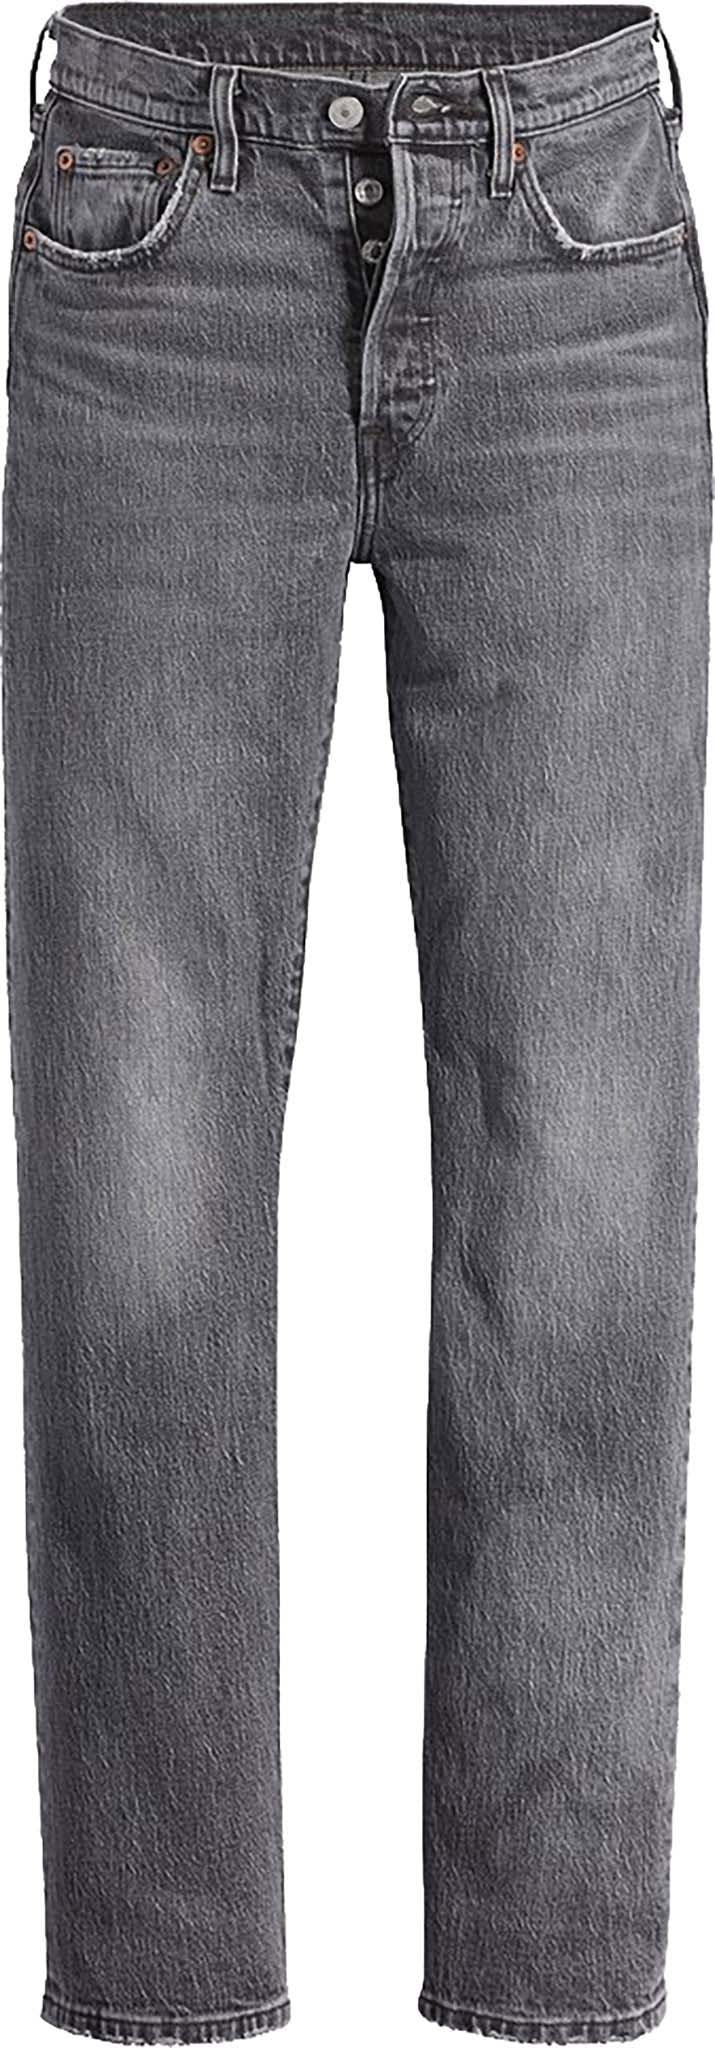 Product image for 501 Jeans - Women's